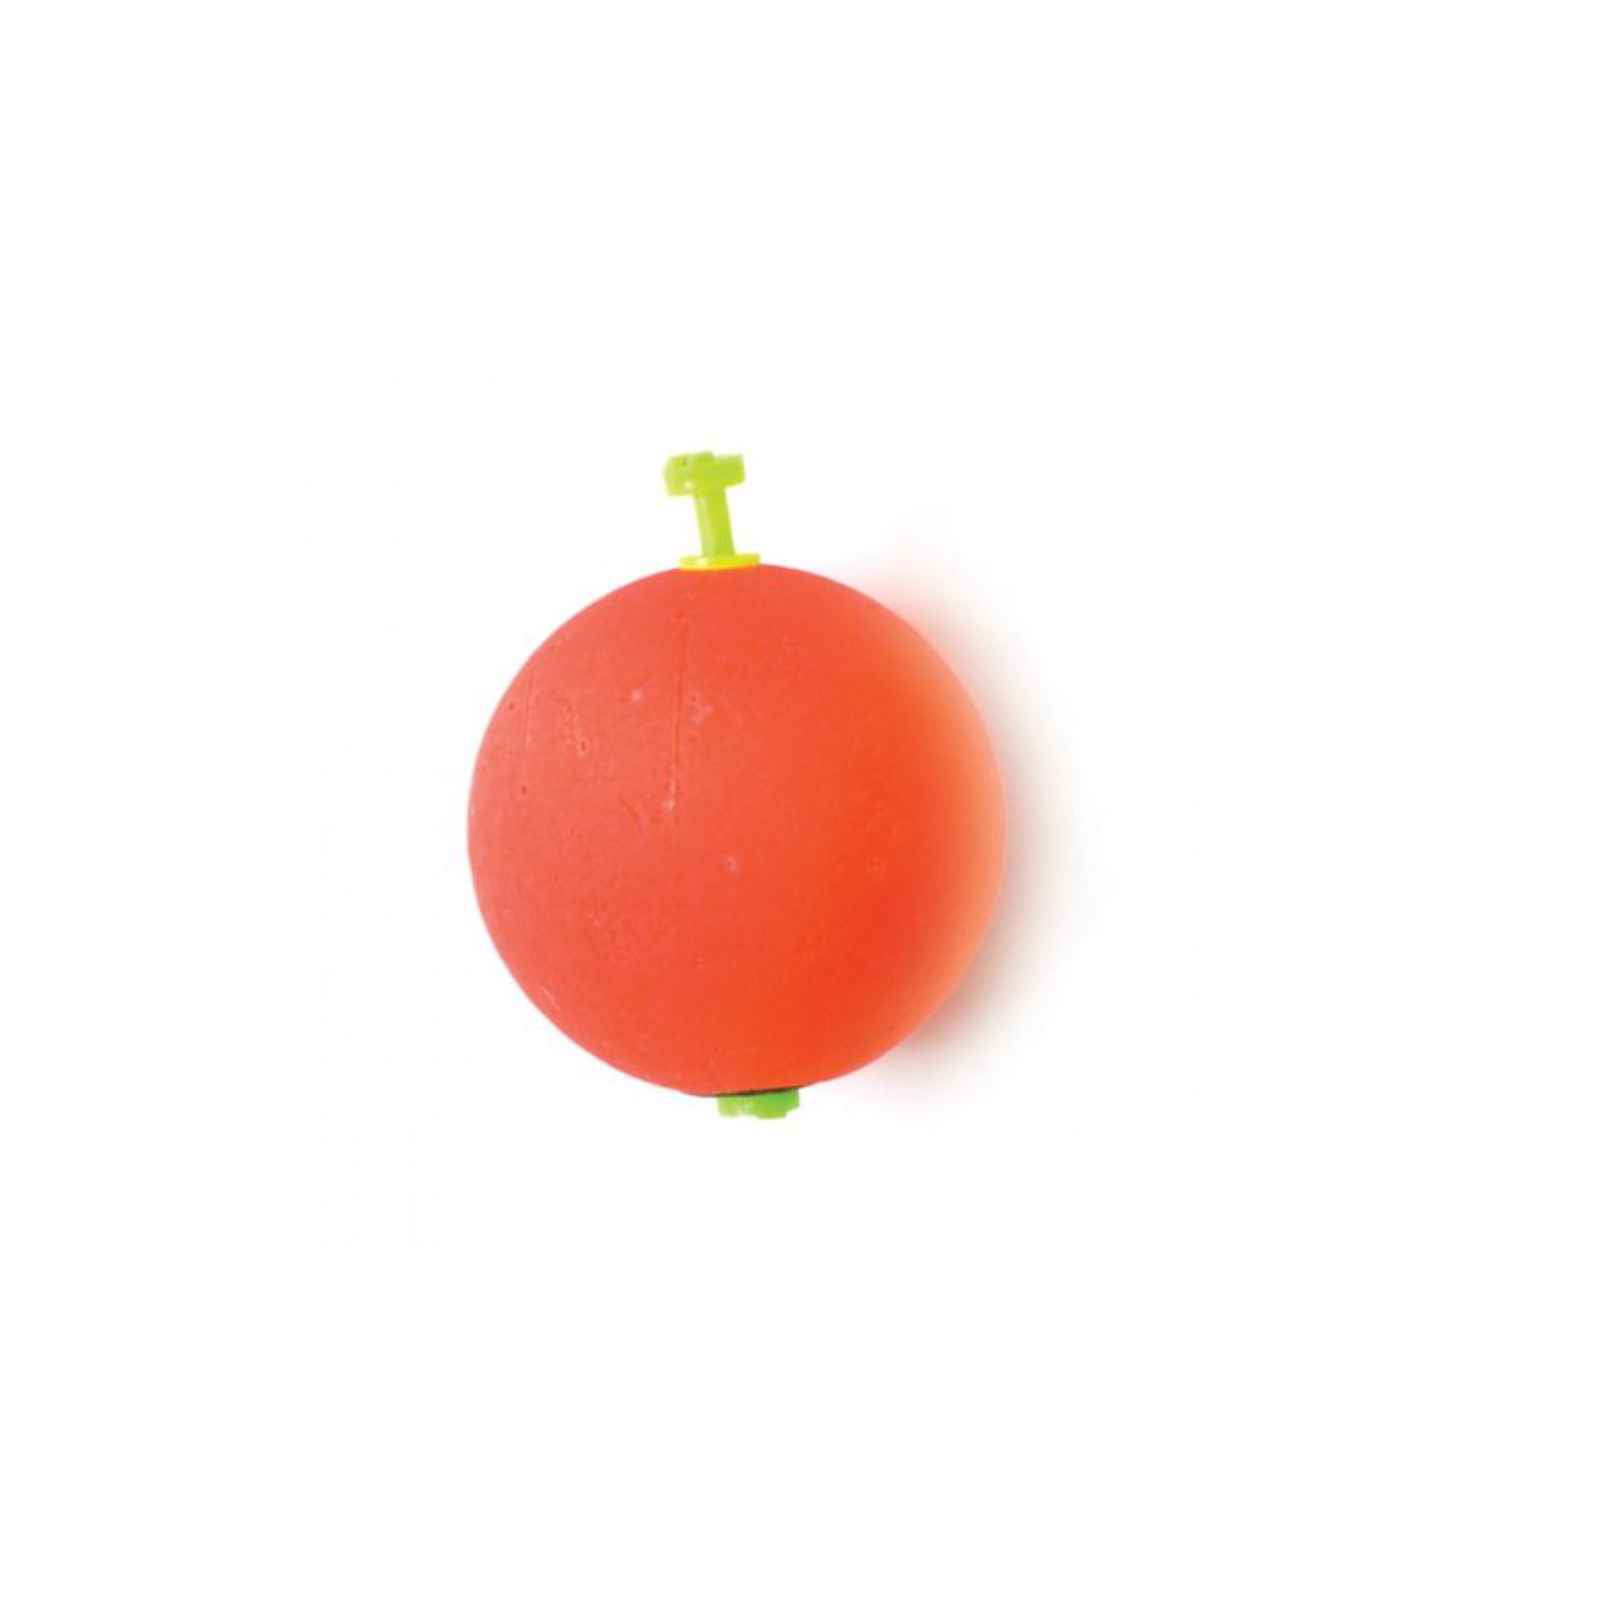 12 1.50" FISHING BOBBERS Cigar Floats Flo Orange Weighted Foam Snap on Float 